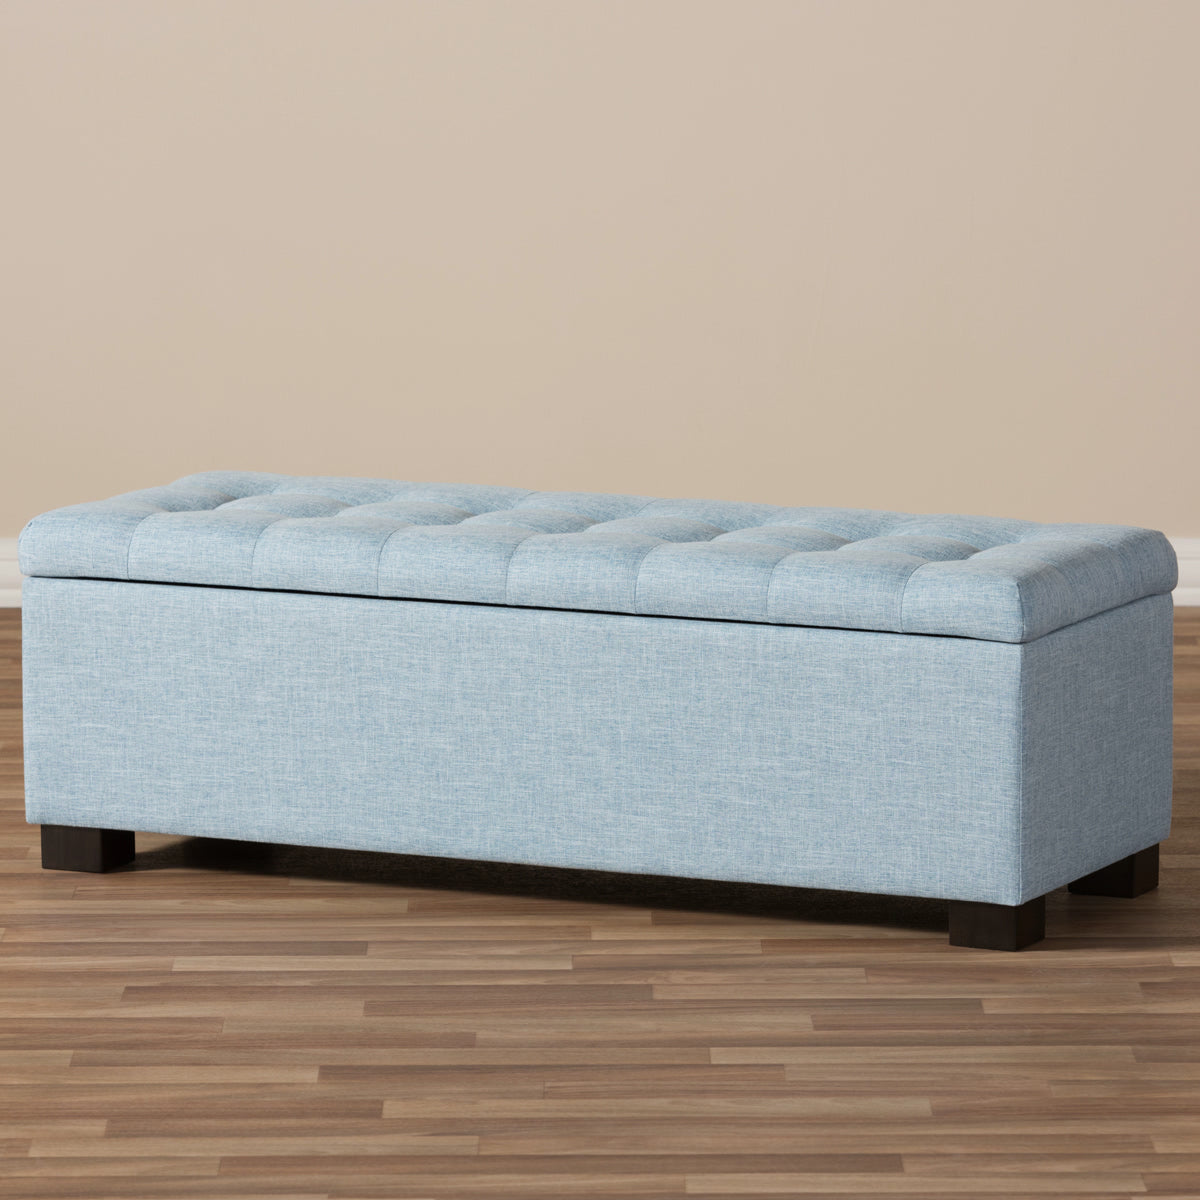 Baxton Studio Roanoke Modern and Contemporary Light Blue Fabric Upholstered Grid-Tufting Storage Ottoman Bench Baxton Studio-benches-Minimal And Modern - 10